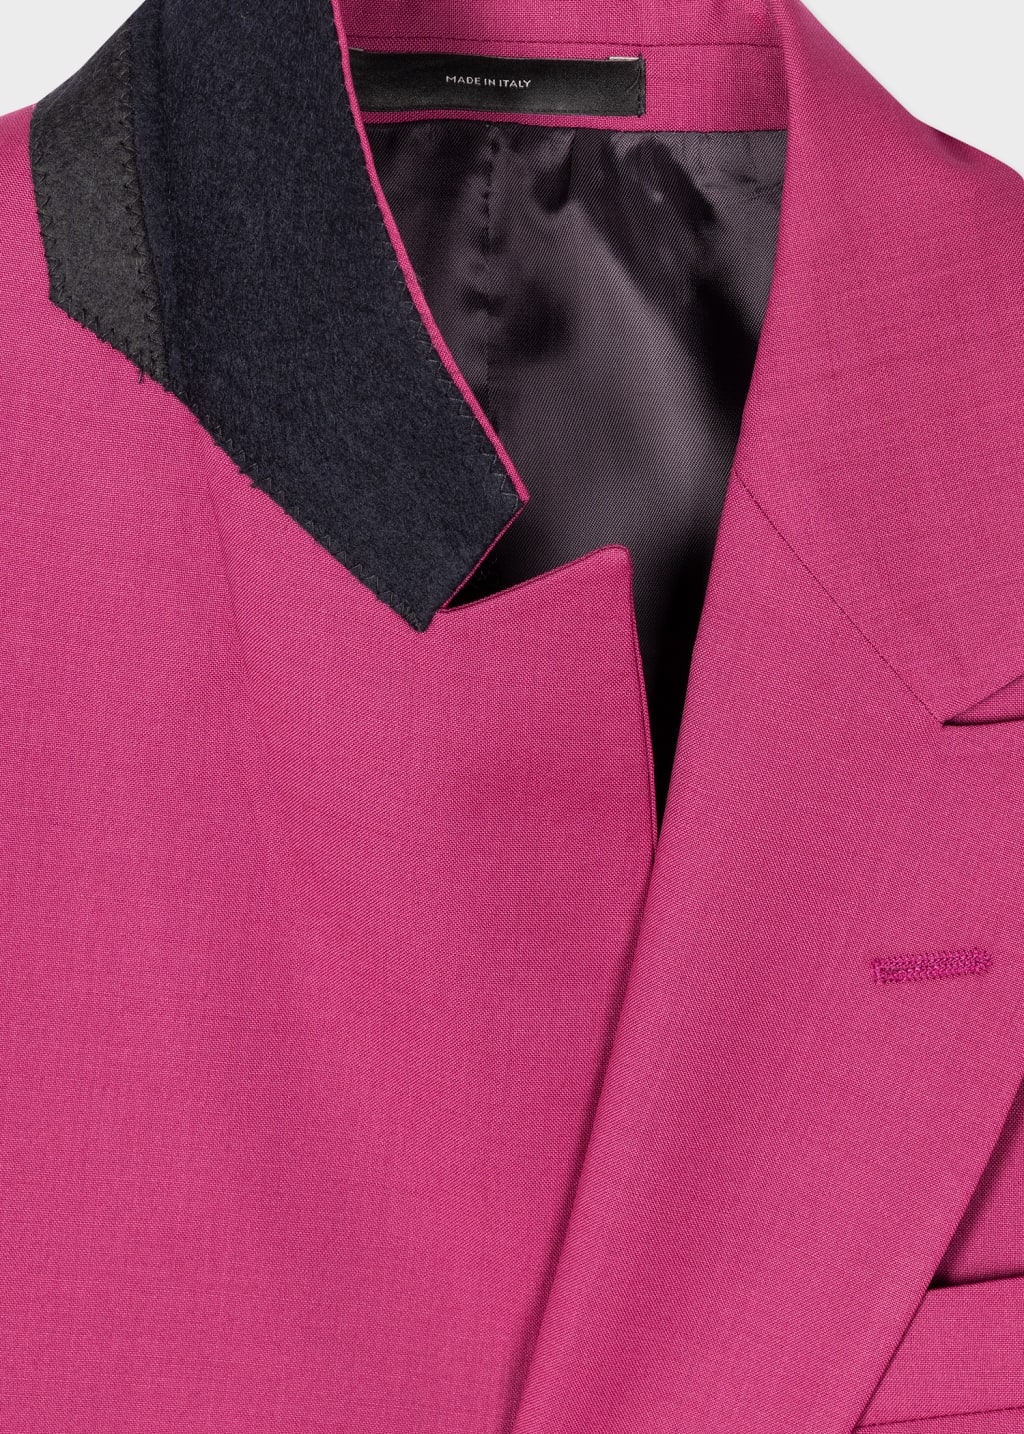 Product View - Tailored-Fit Pink Wool-Mohair Blazer by Paul Smith